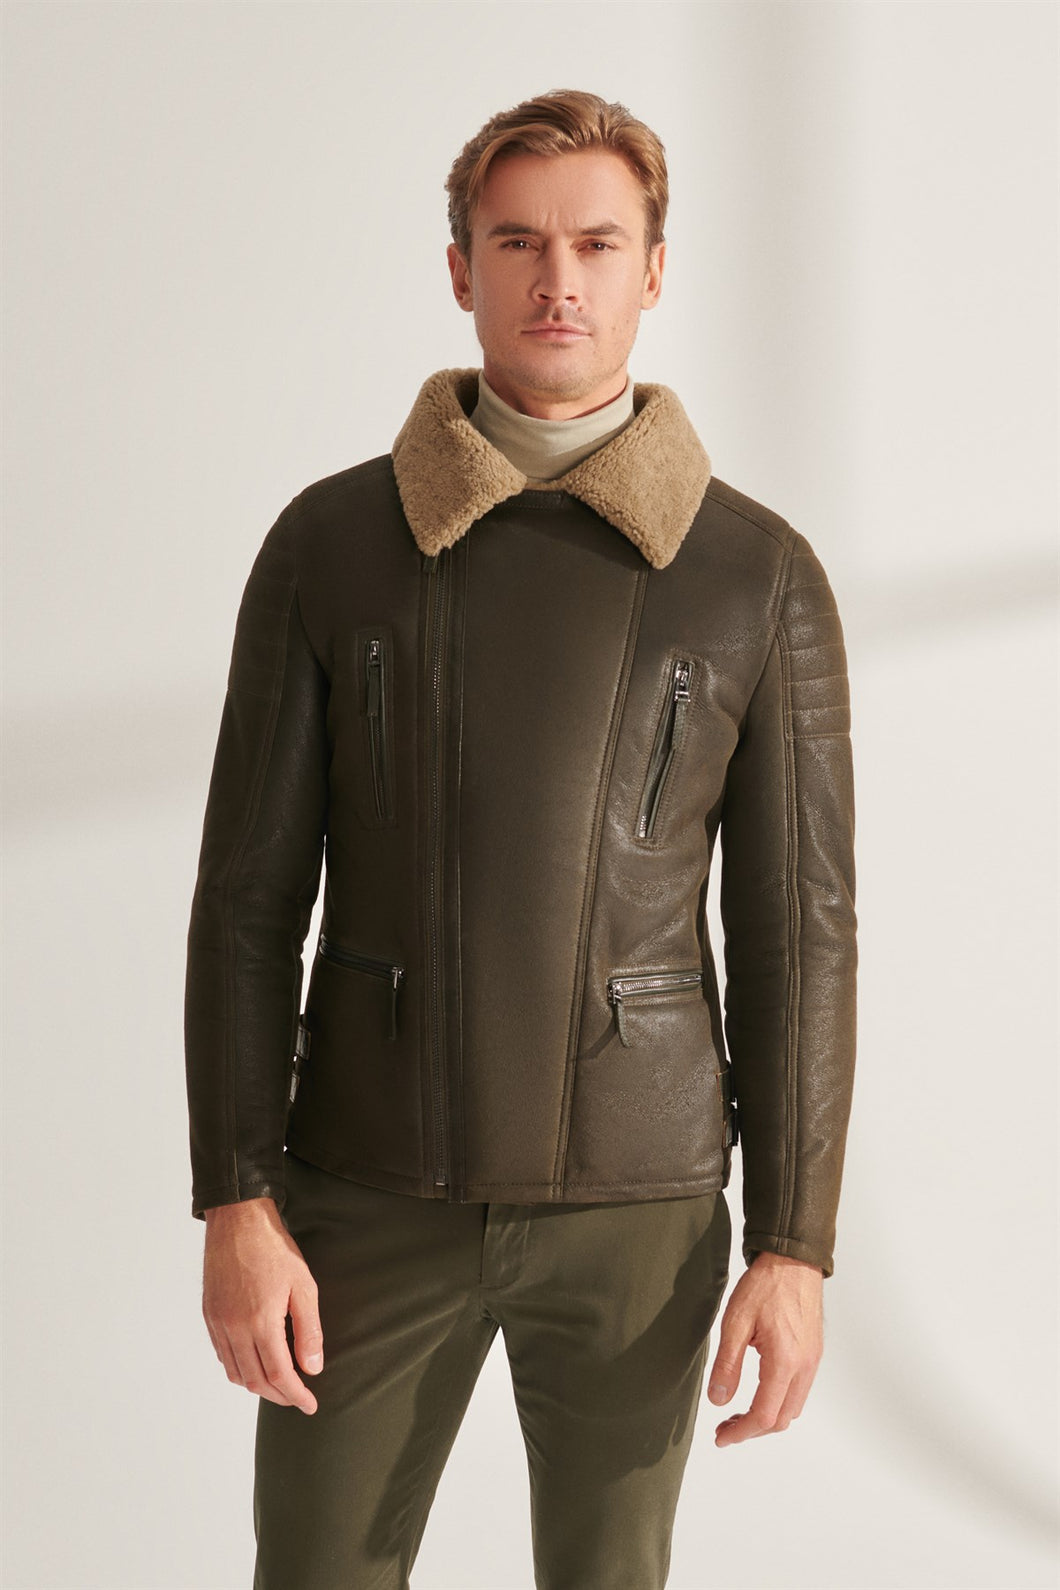 Men's Casual Moss Green Shearling Leather Jacket